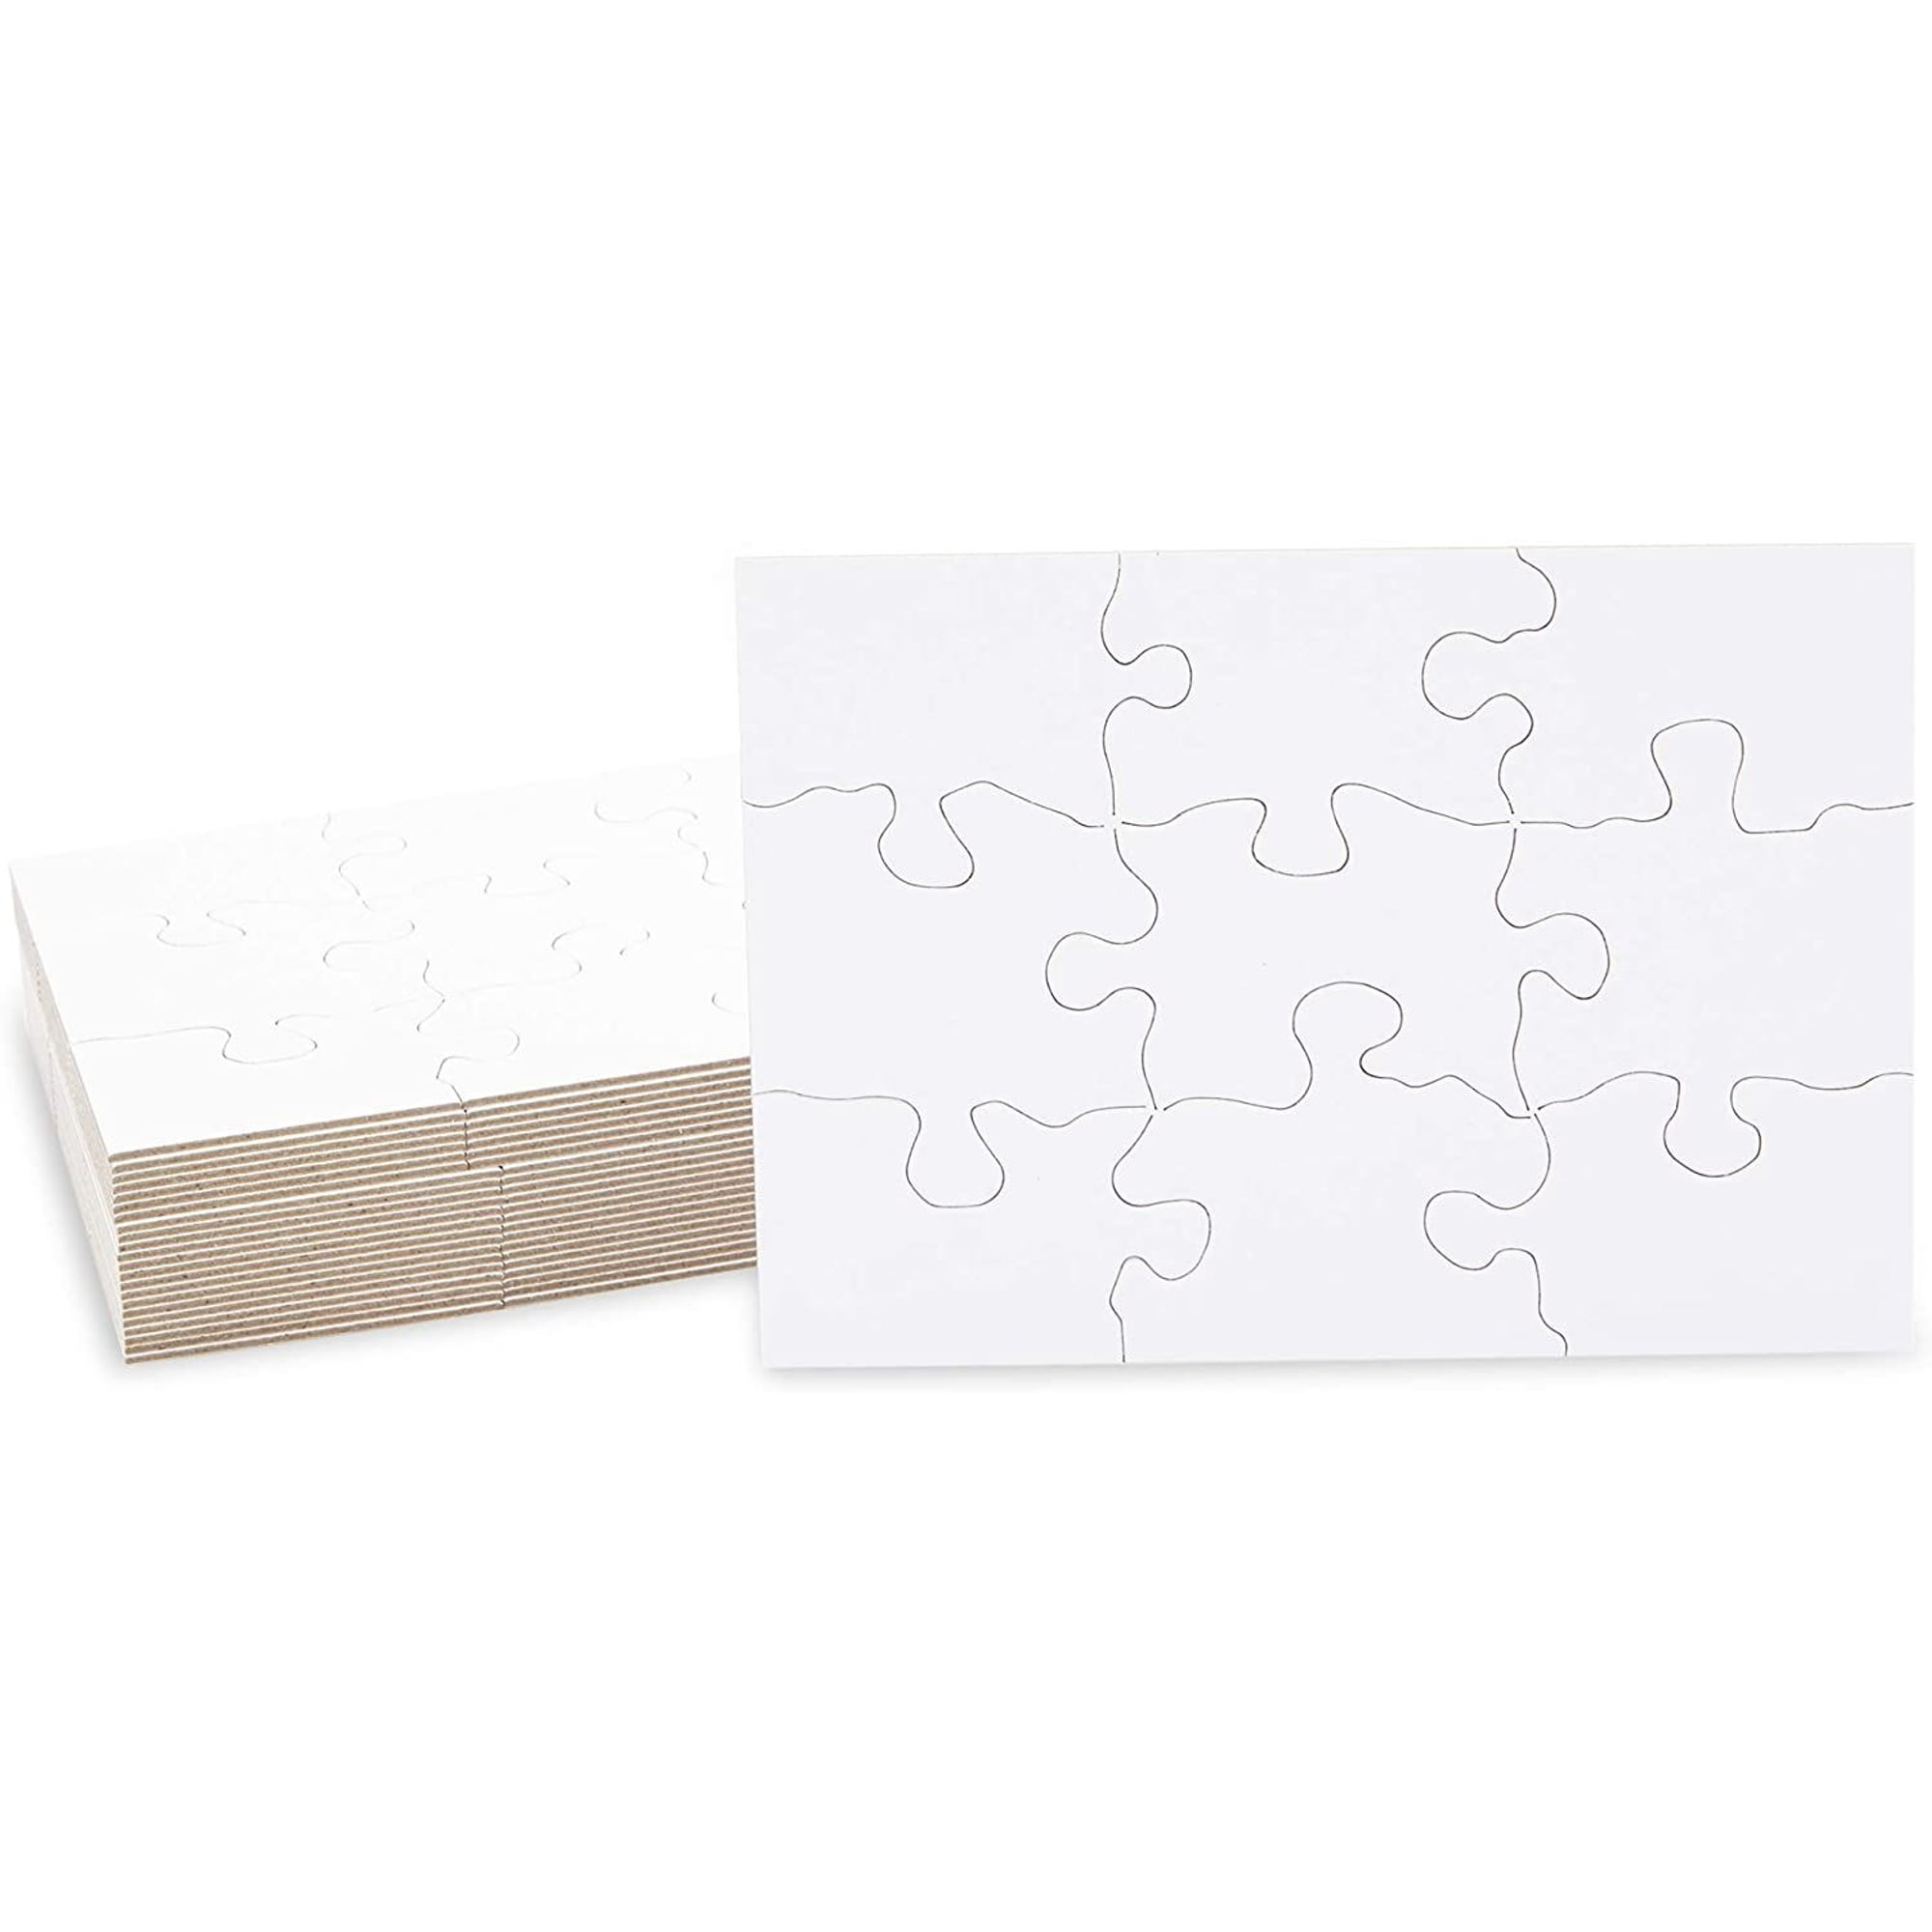 Blank Jigsaw Puzzle 9 pieces. Simple line art style for printing